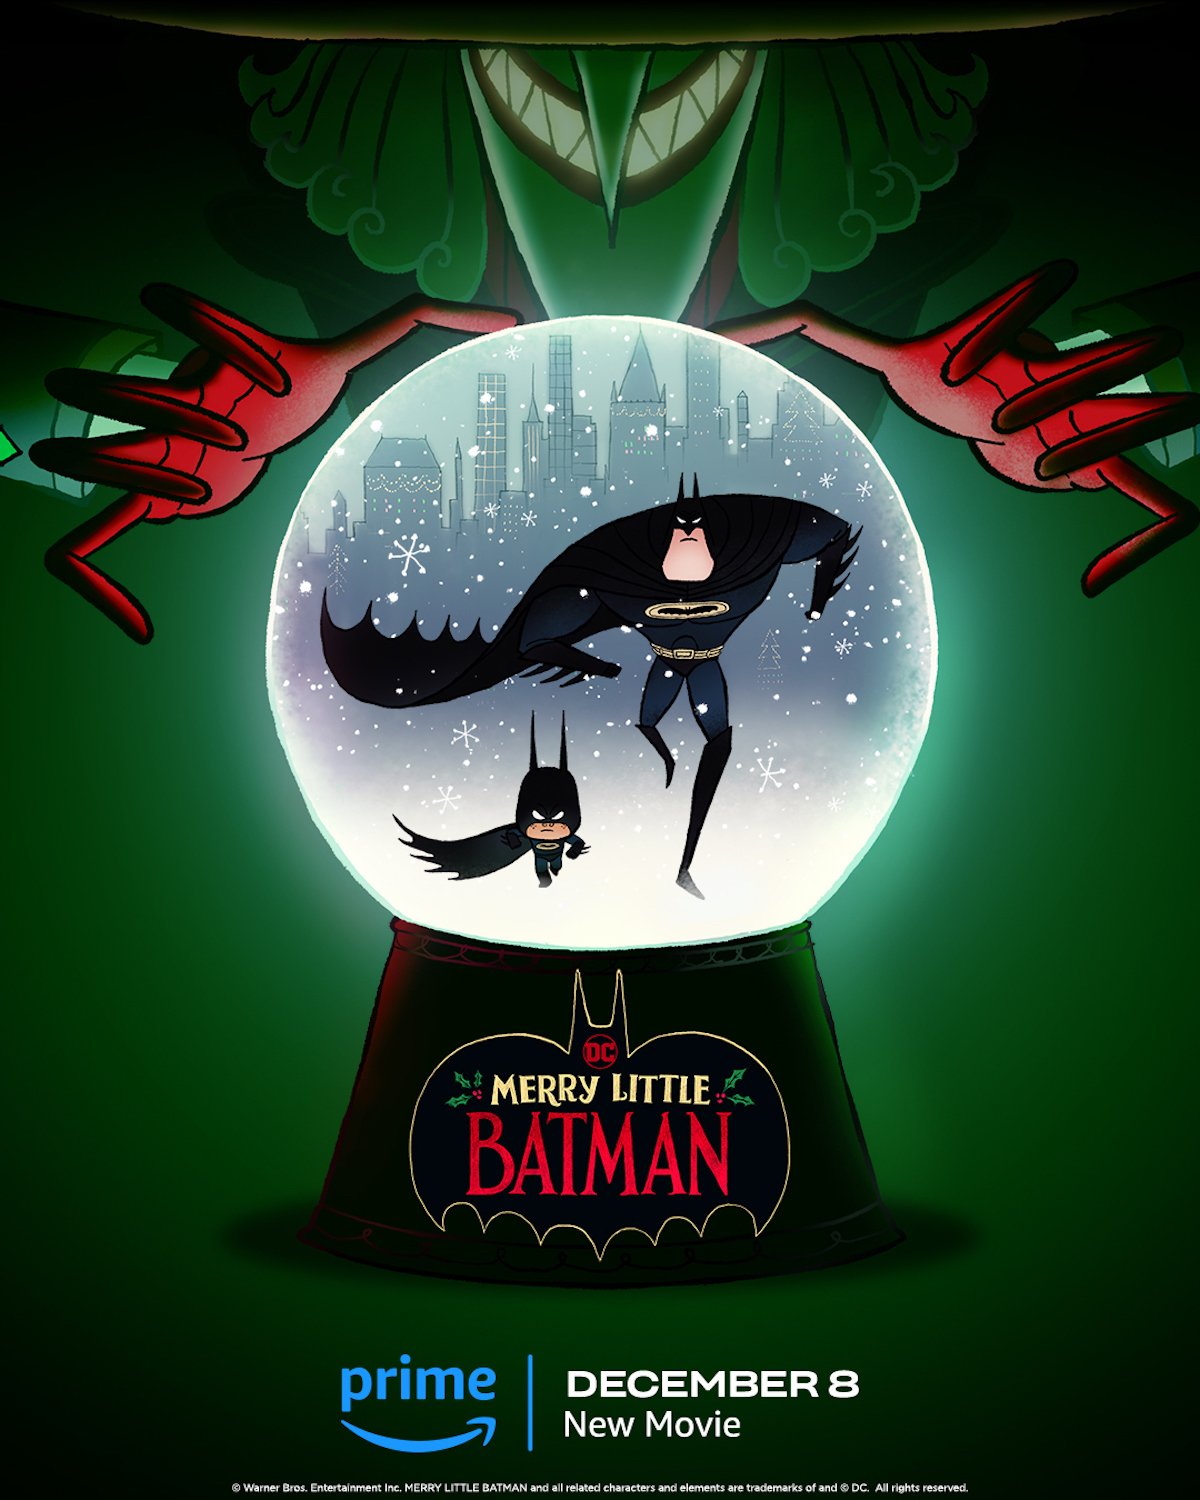 Batman and his costumed son running in a snow globe with the Joker and his red gloved hands hovering over it like a giant in a poster for Merry Little Batman